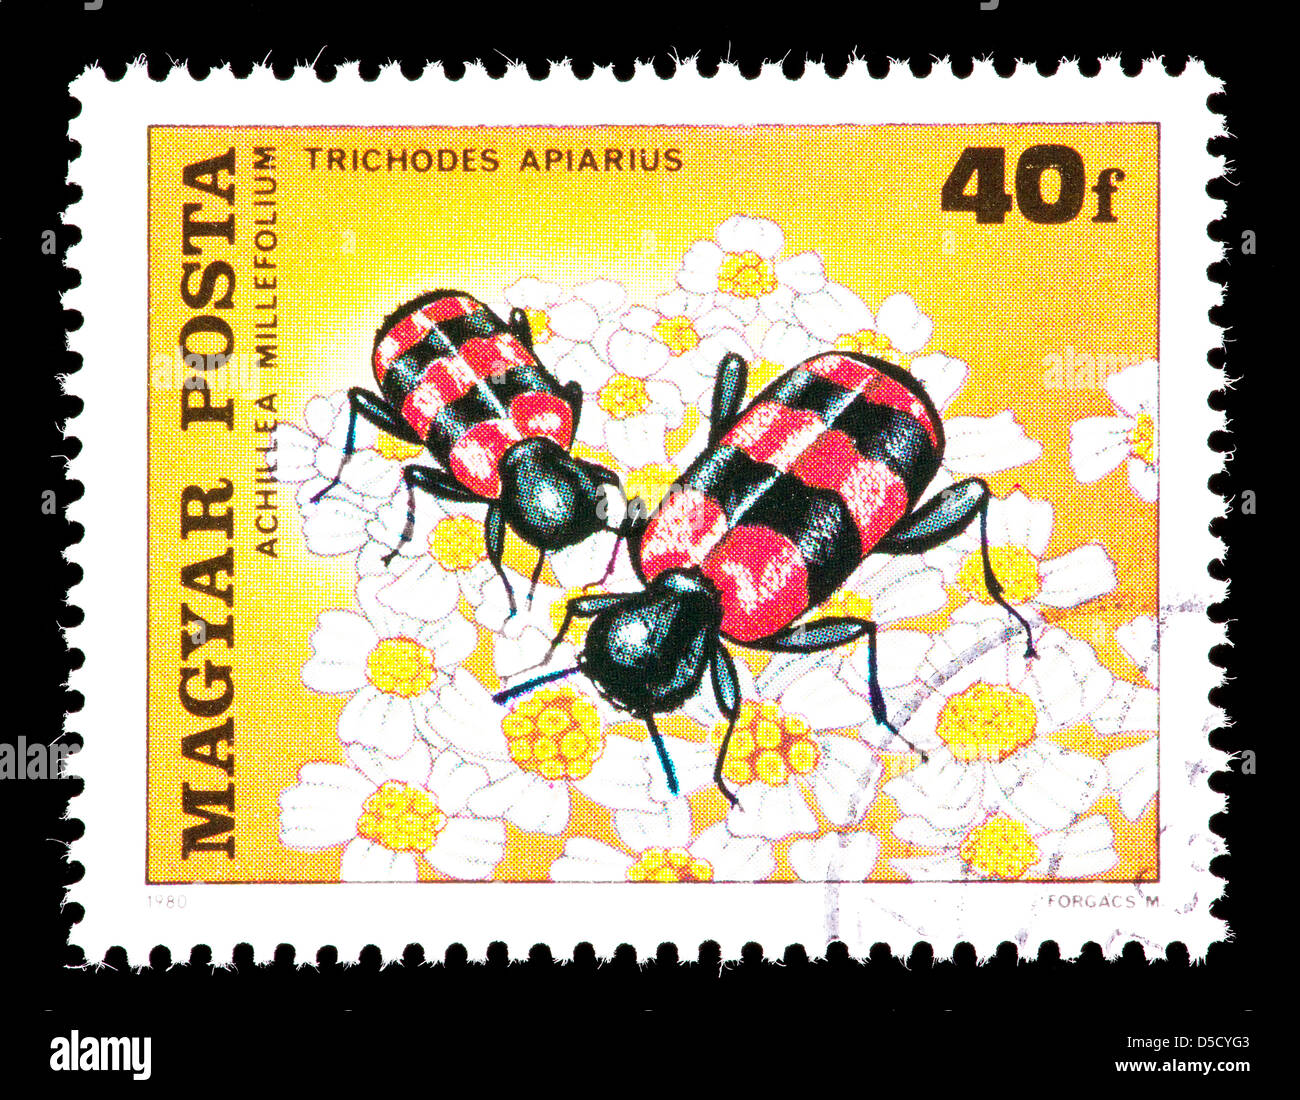 Postage stamp from Hungary depicting a checkered beetle (Trichodes apiarius) Stock Photo